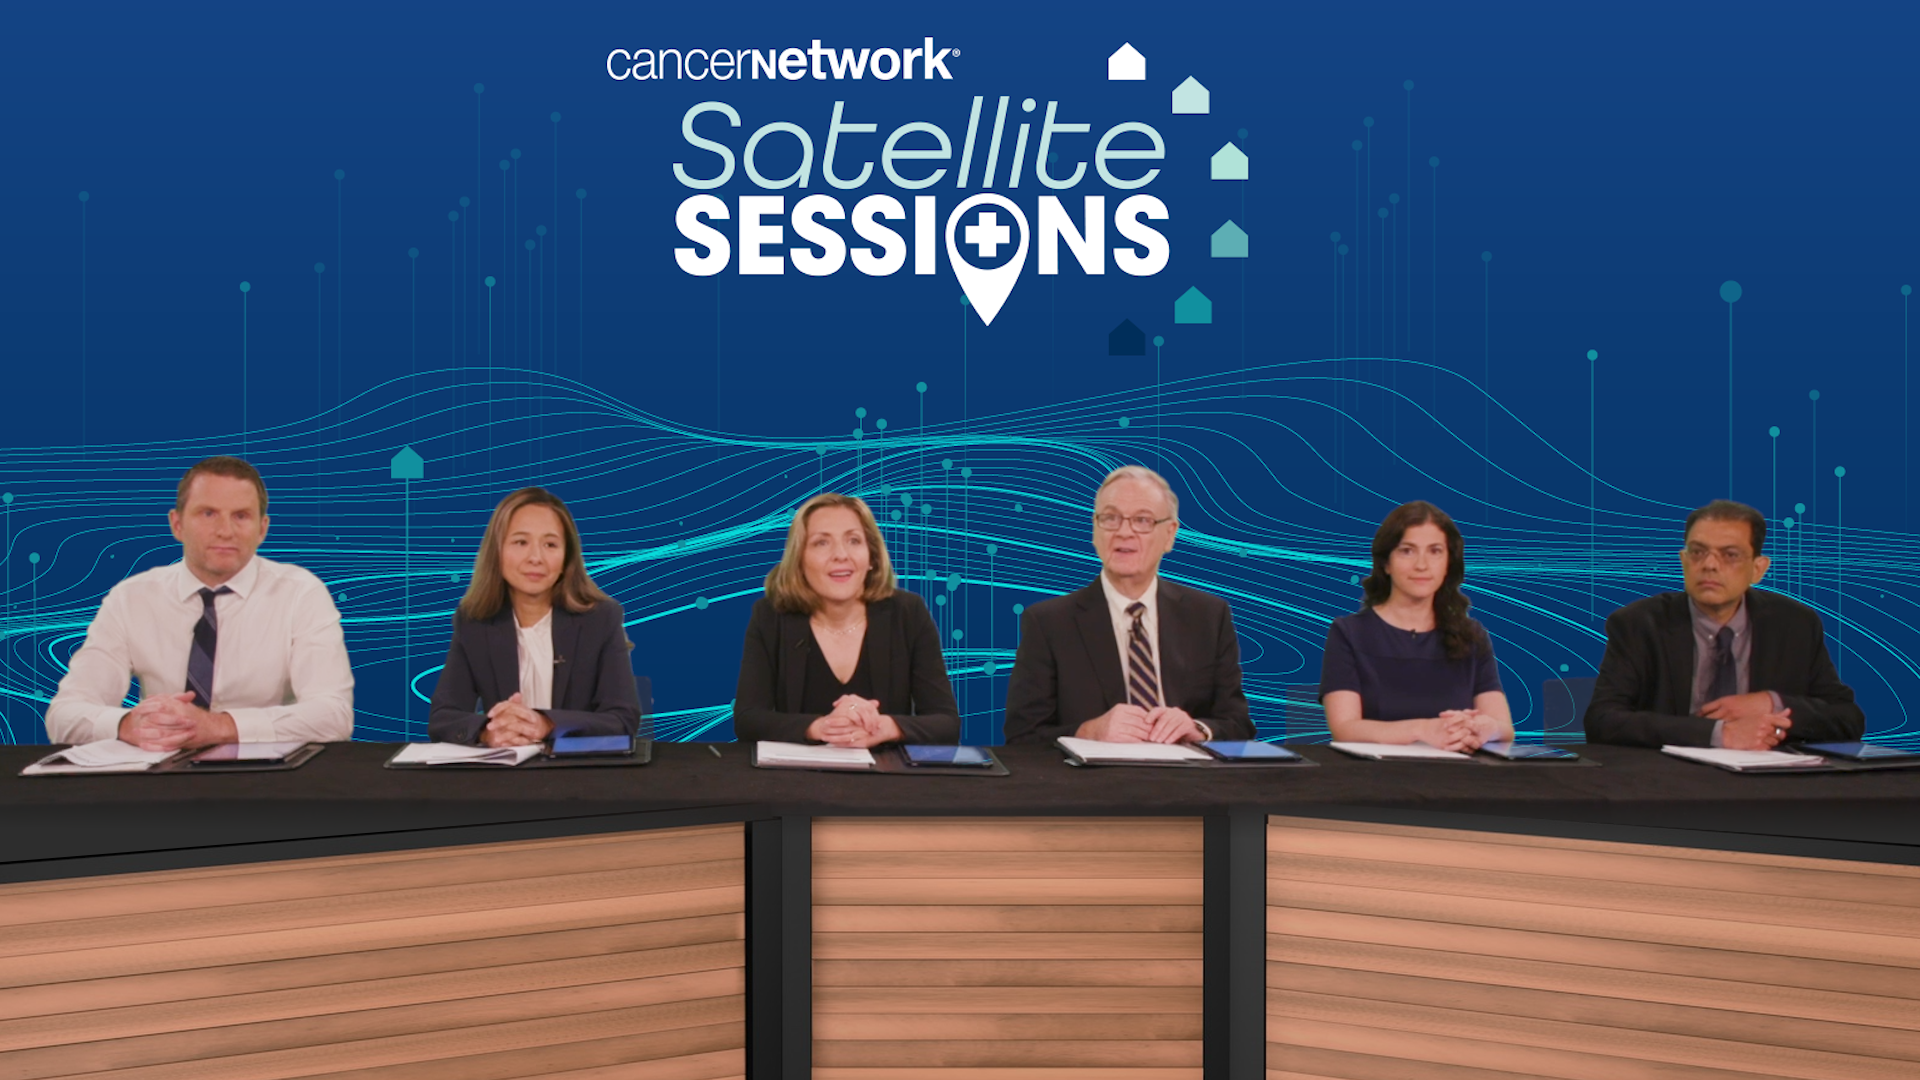 Treatment of Multiple Myeloma: Best Practices from Yale Cancer Center and Satellites